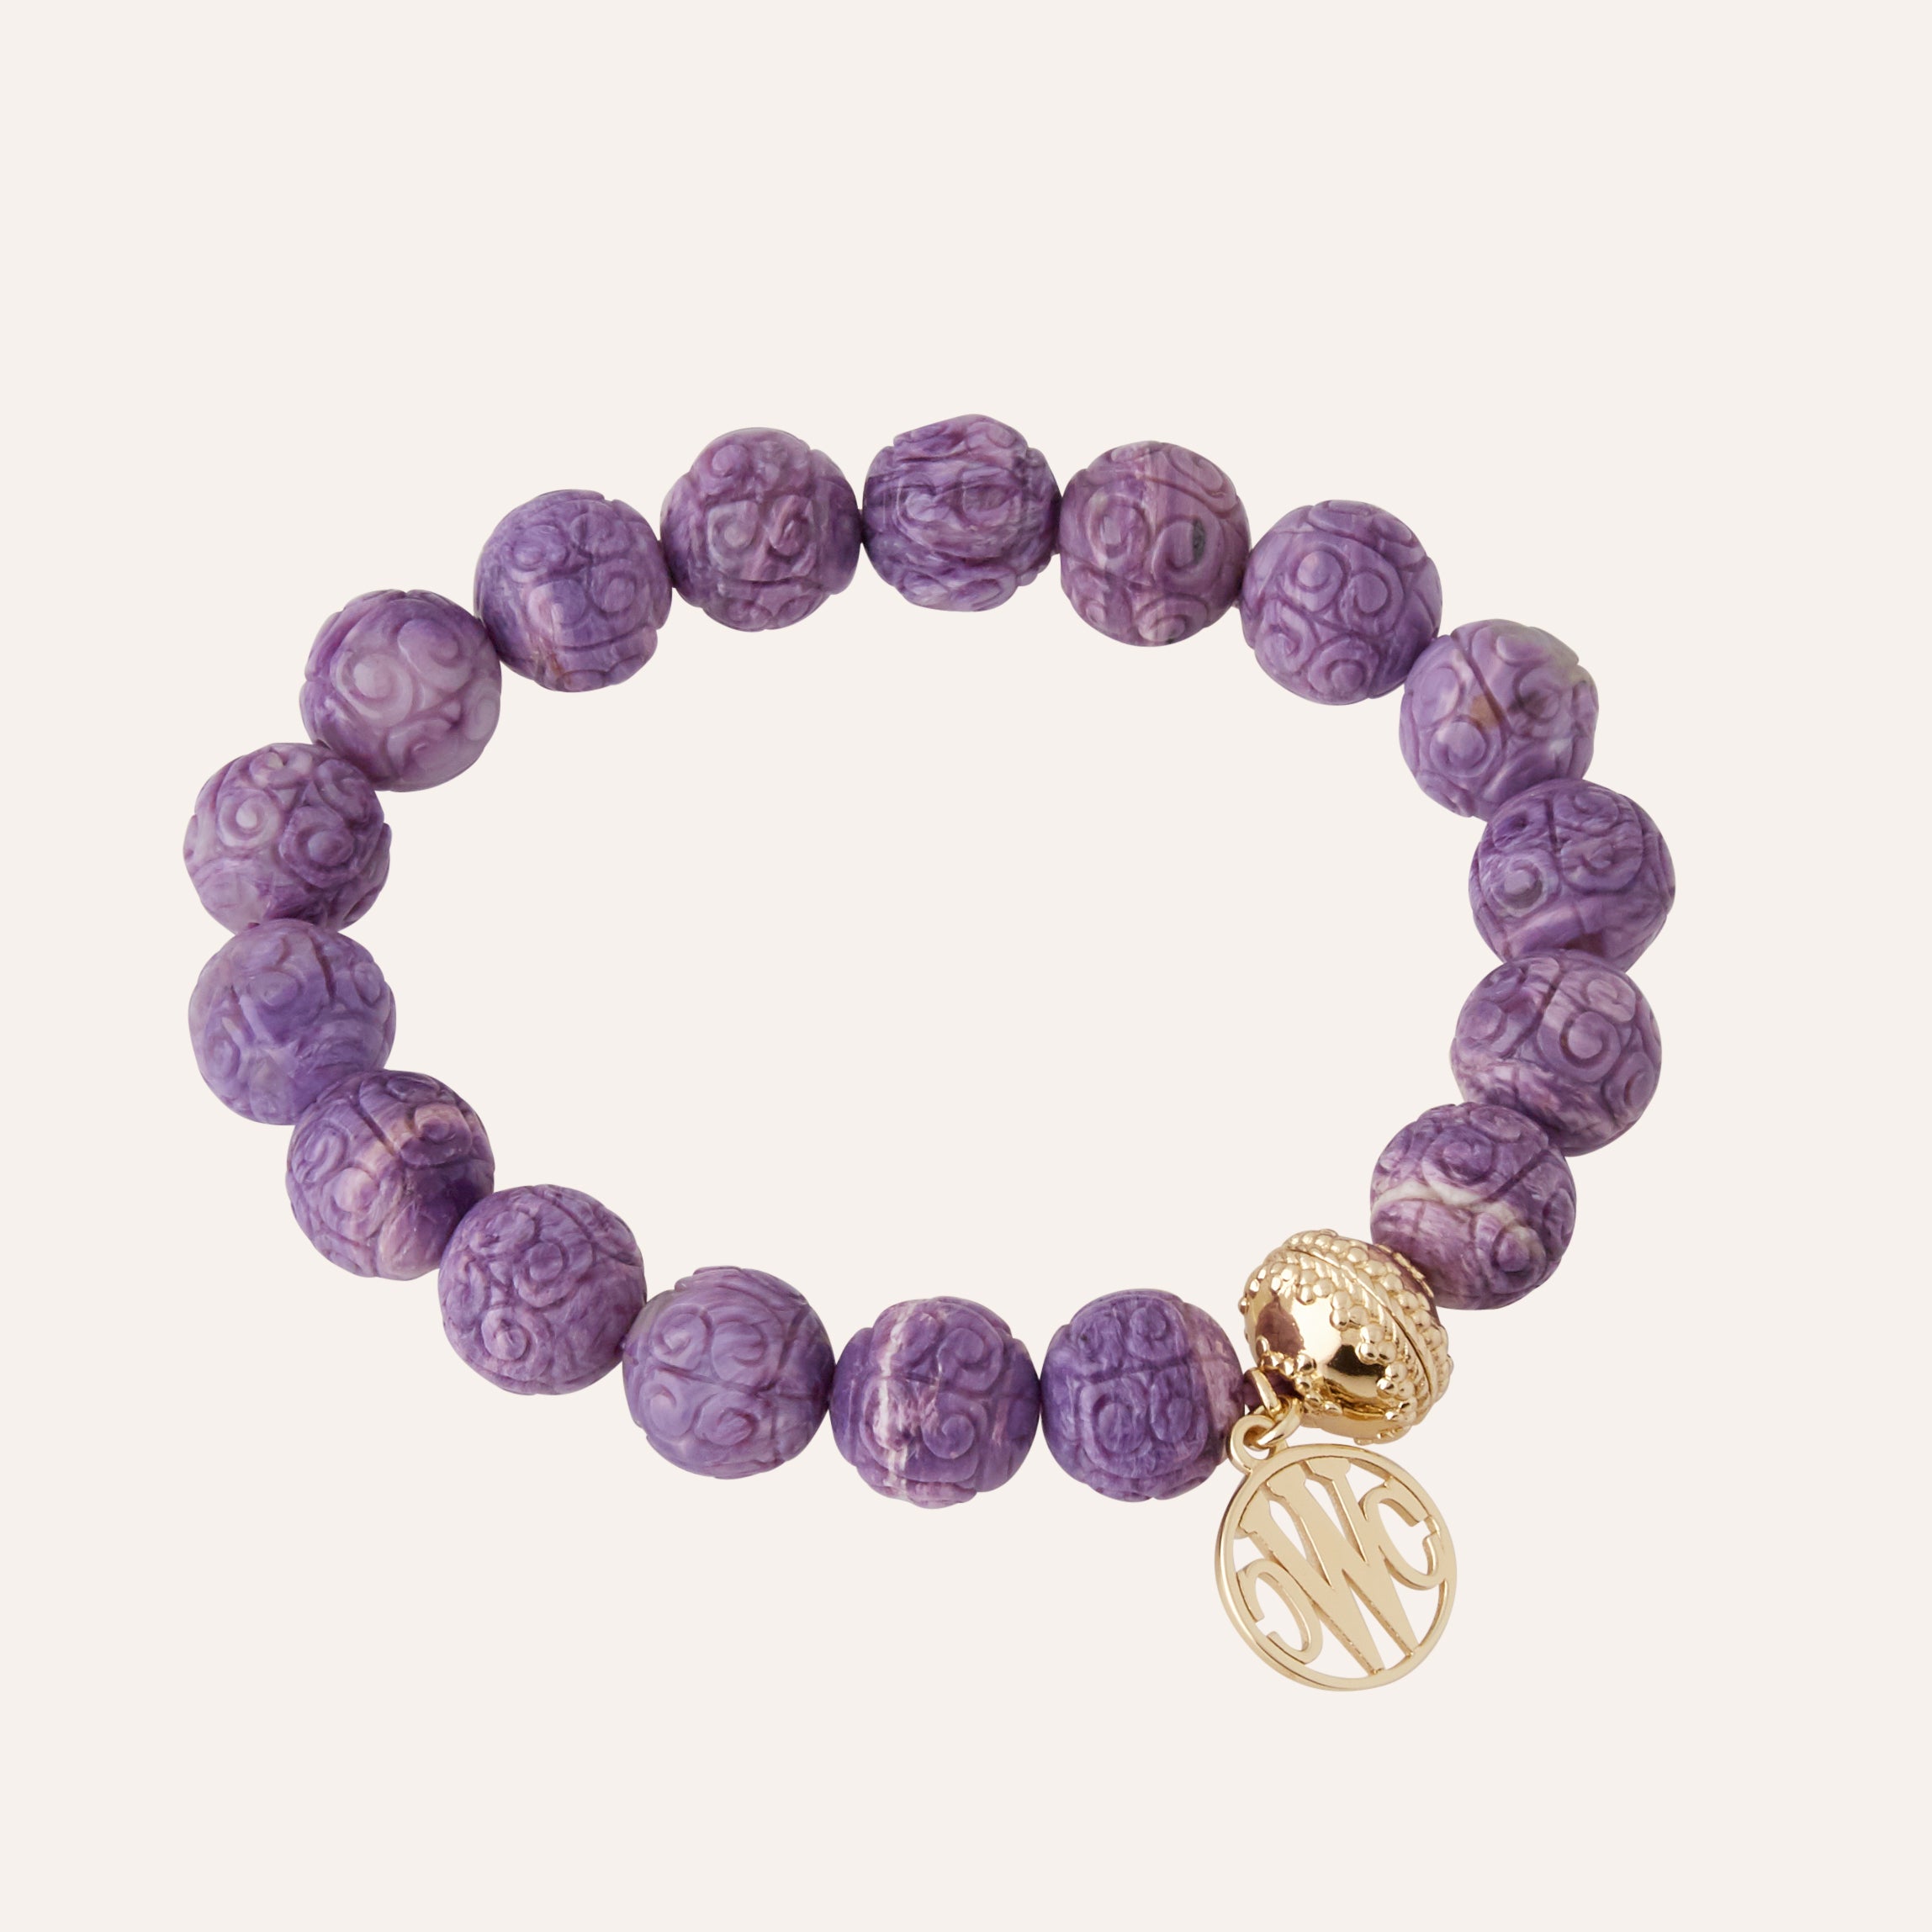 Carved Russian Charoite 11mm Stretch Bracelet